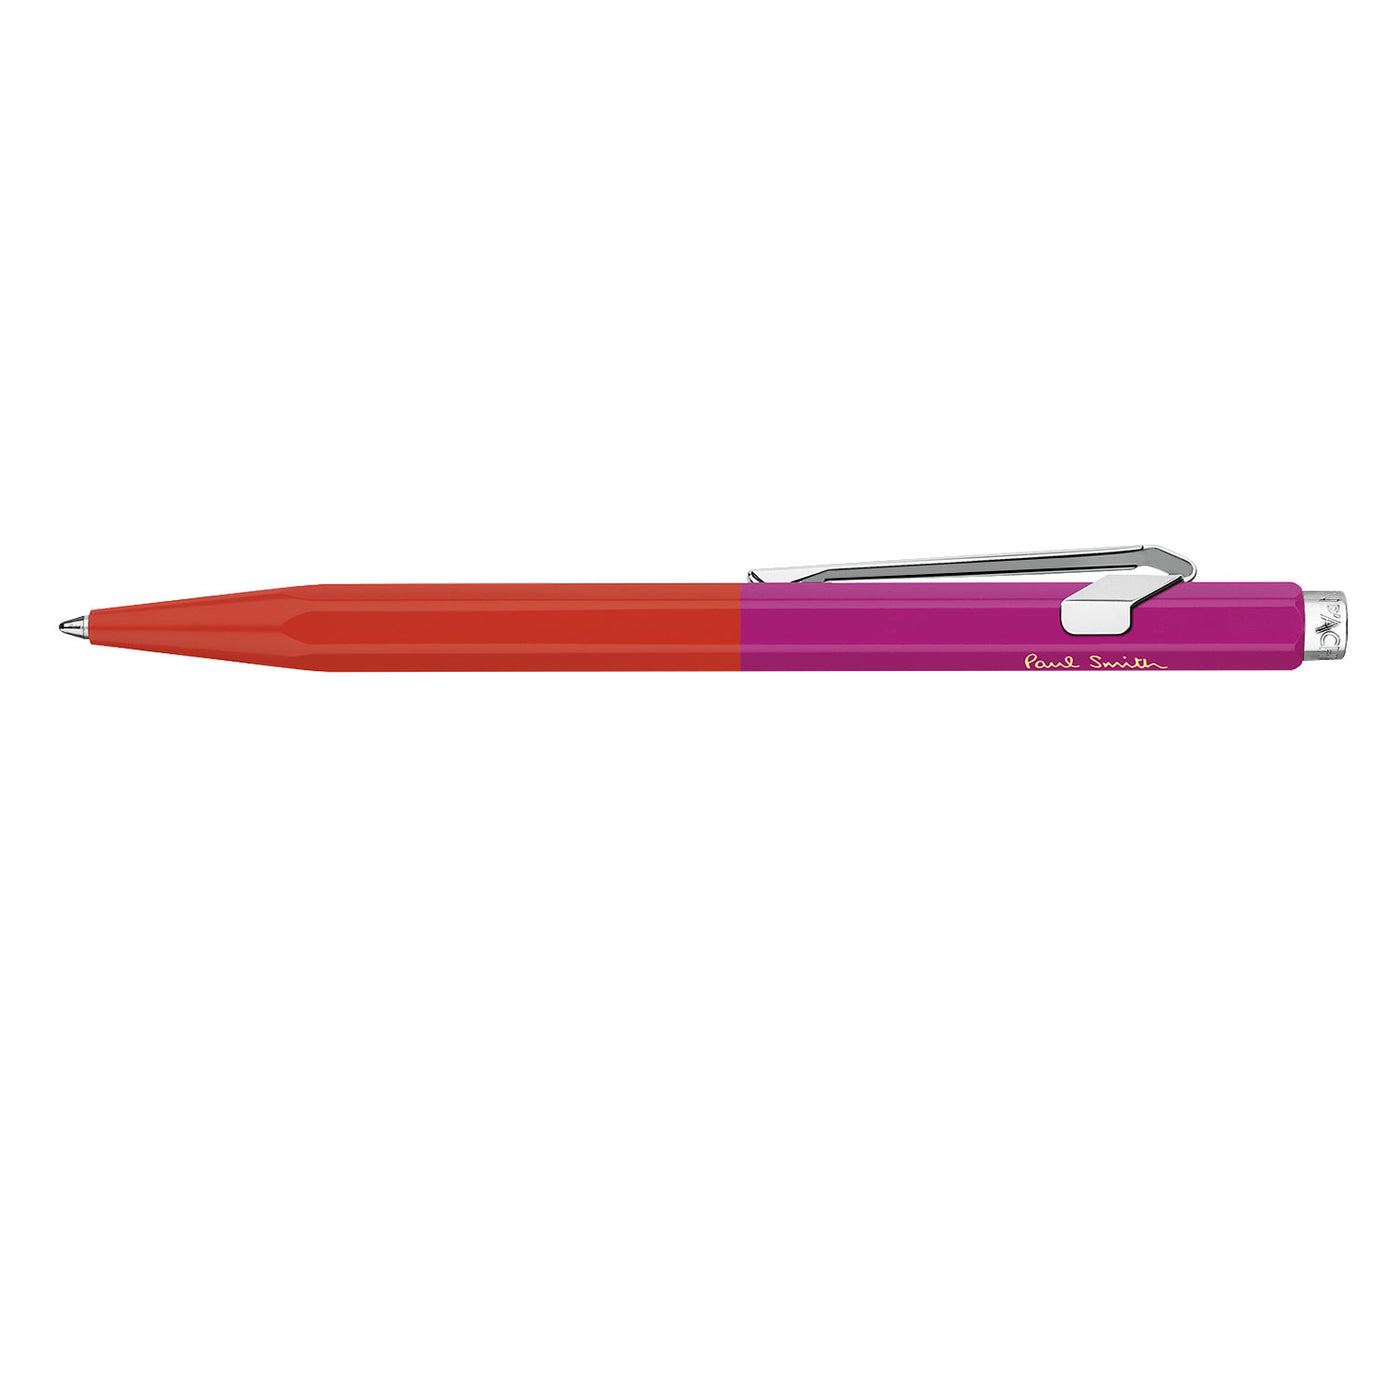 Caran d'Ache 849 Paul Smith Ball Pen - Warm Red & Melrose Pink (Limited Edition) 3